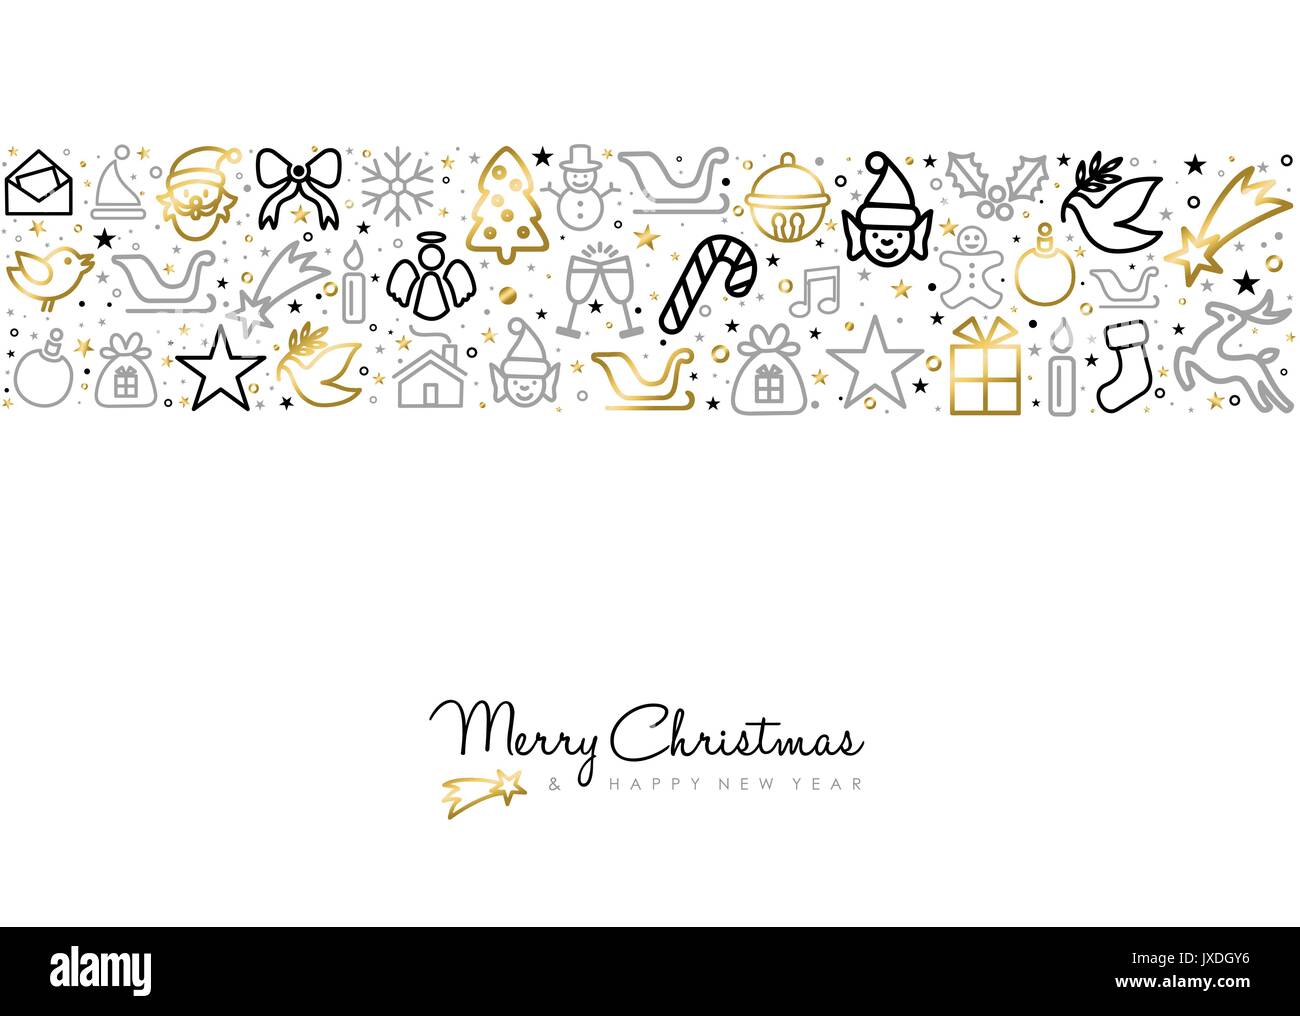 Merry Christmas and Happy New Year greeting card with gold line art holiday icon pattern, outline style decoration background. EPS10 vector. Stock Vector